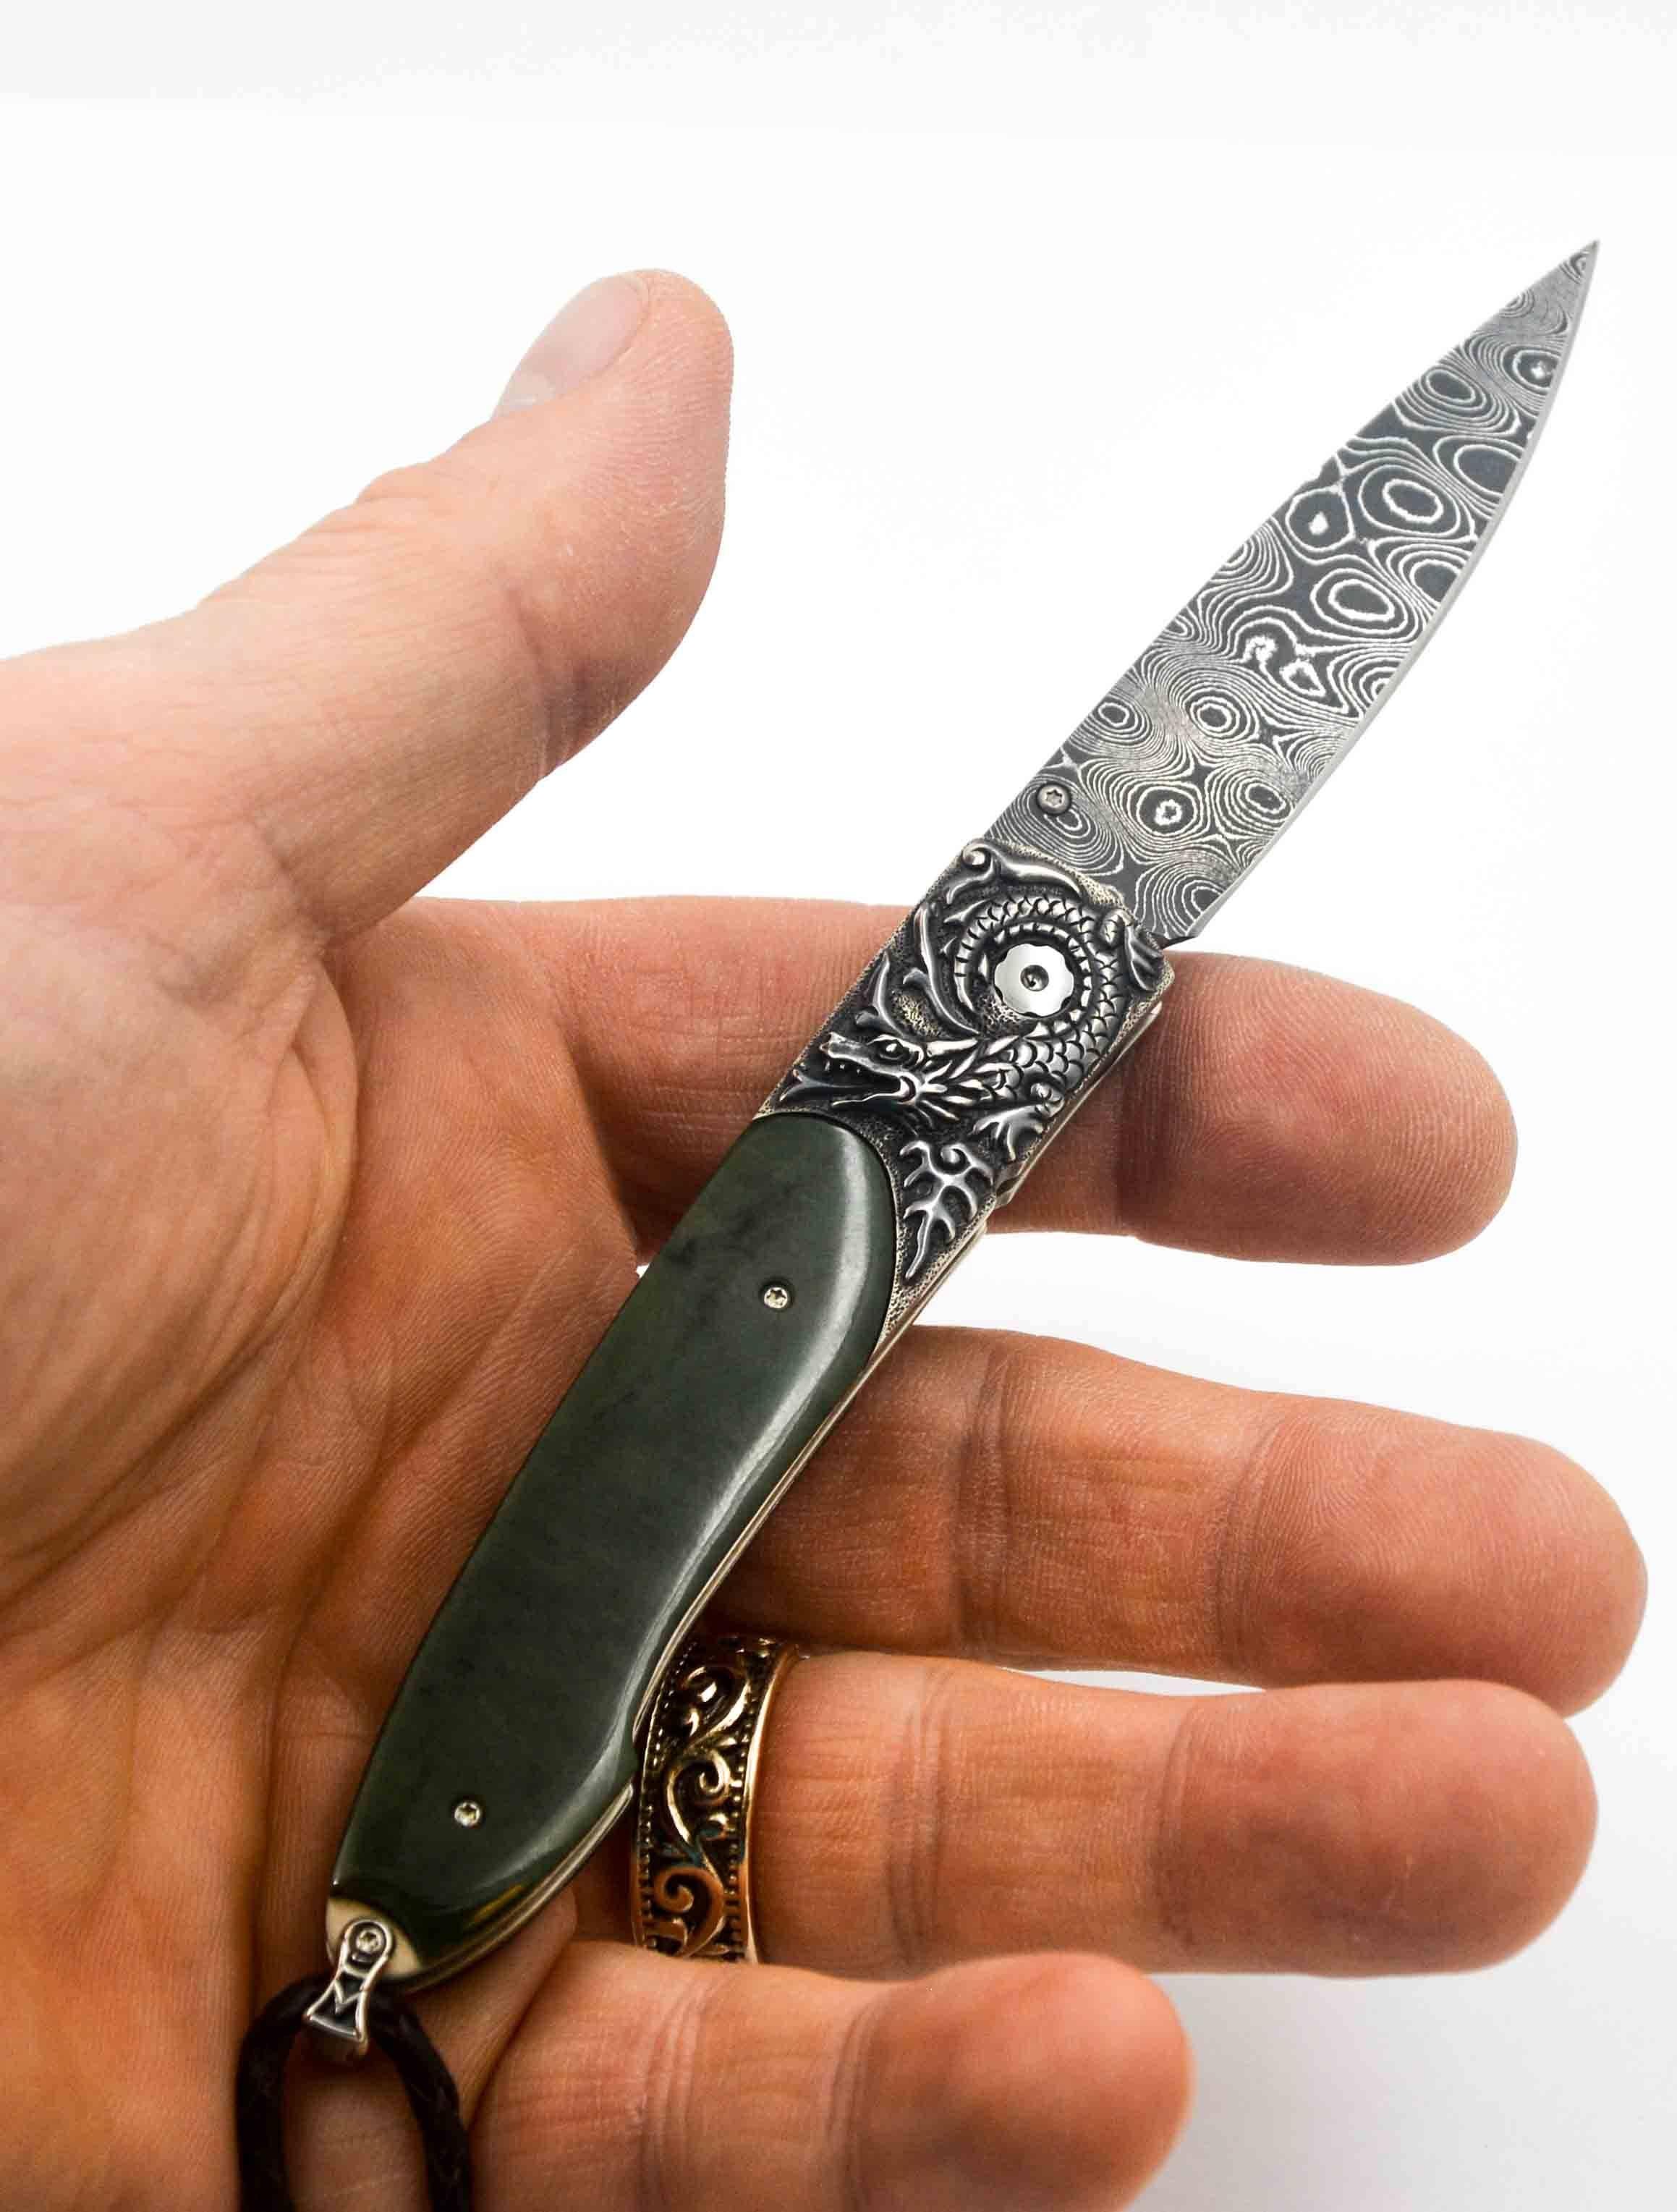 This William Henry Lancet Smaug knife is an excellent example of William Henry quality and William Henry artistry.  The knife features an amazing William Henry Damascus steel blade of leopard skin pattern in the William Henry lance shape.  The